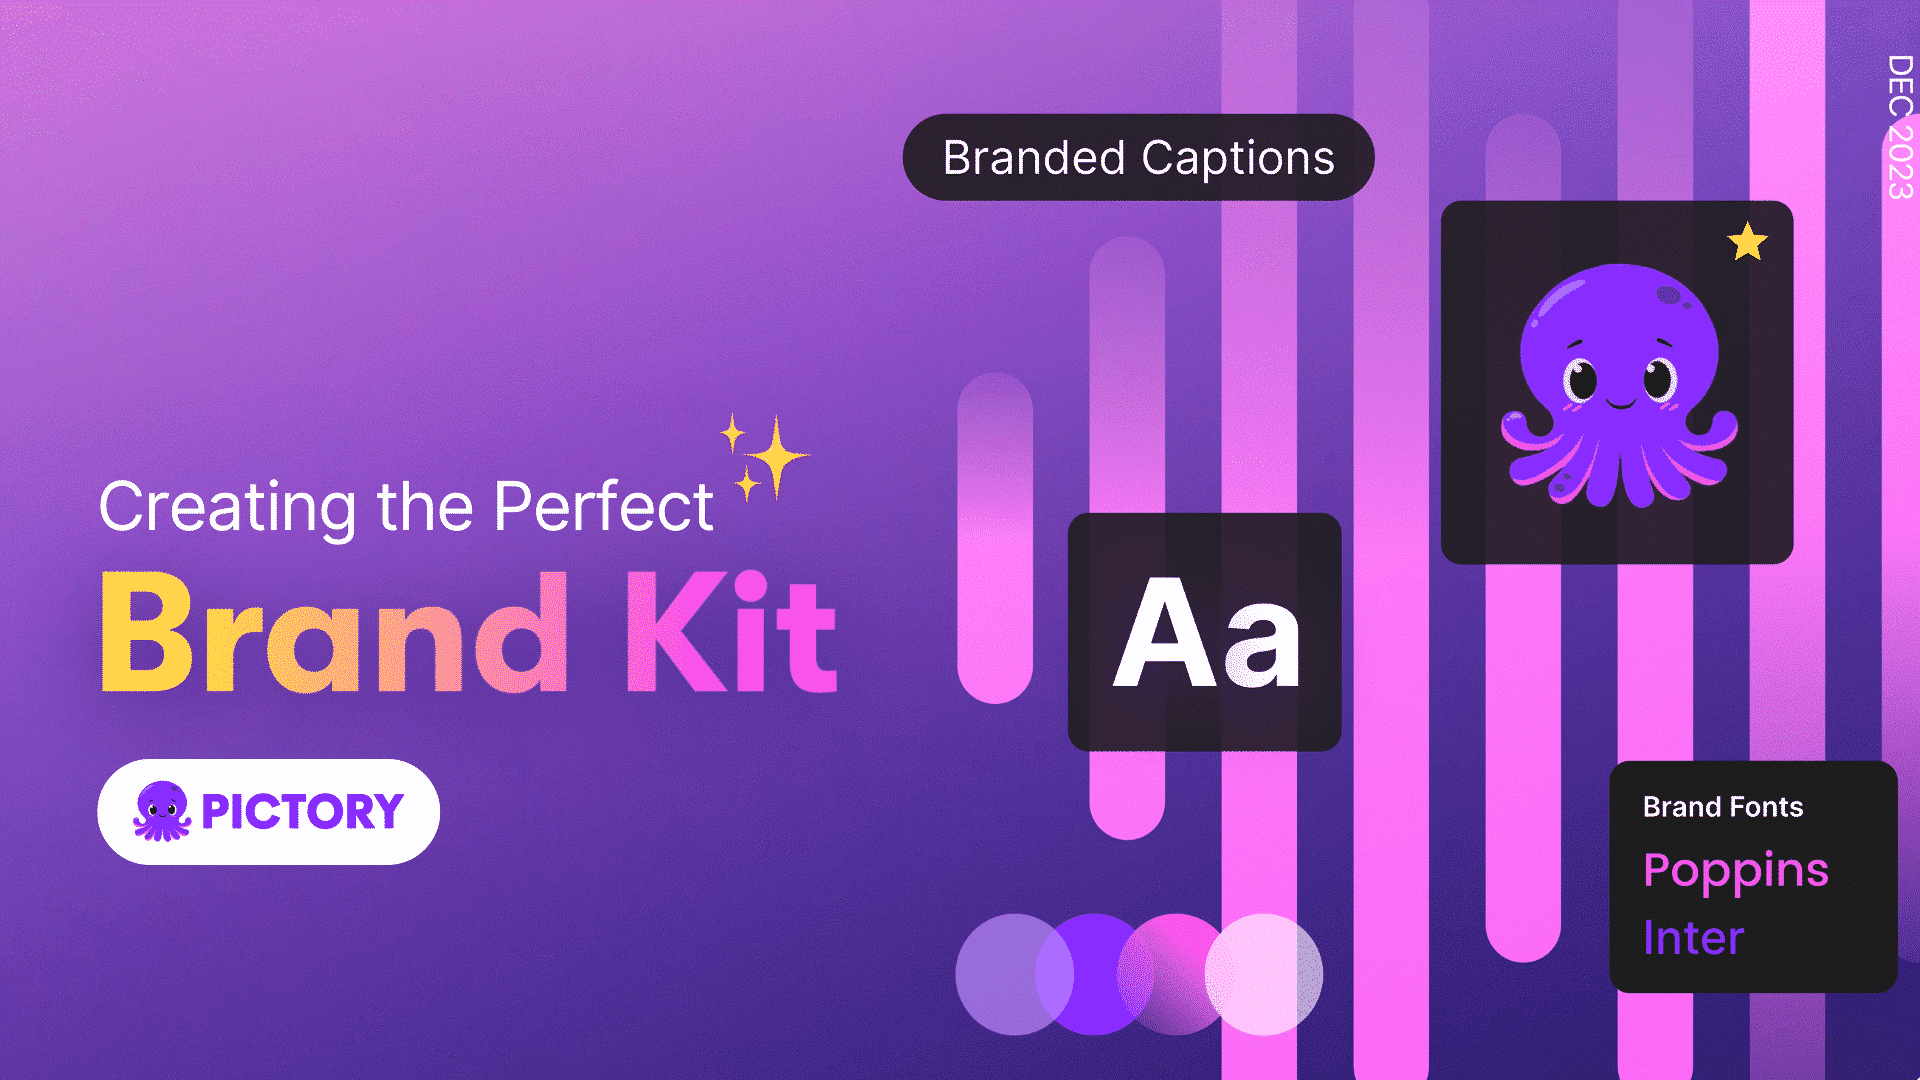 Creating the perfect brand kit with pictory